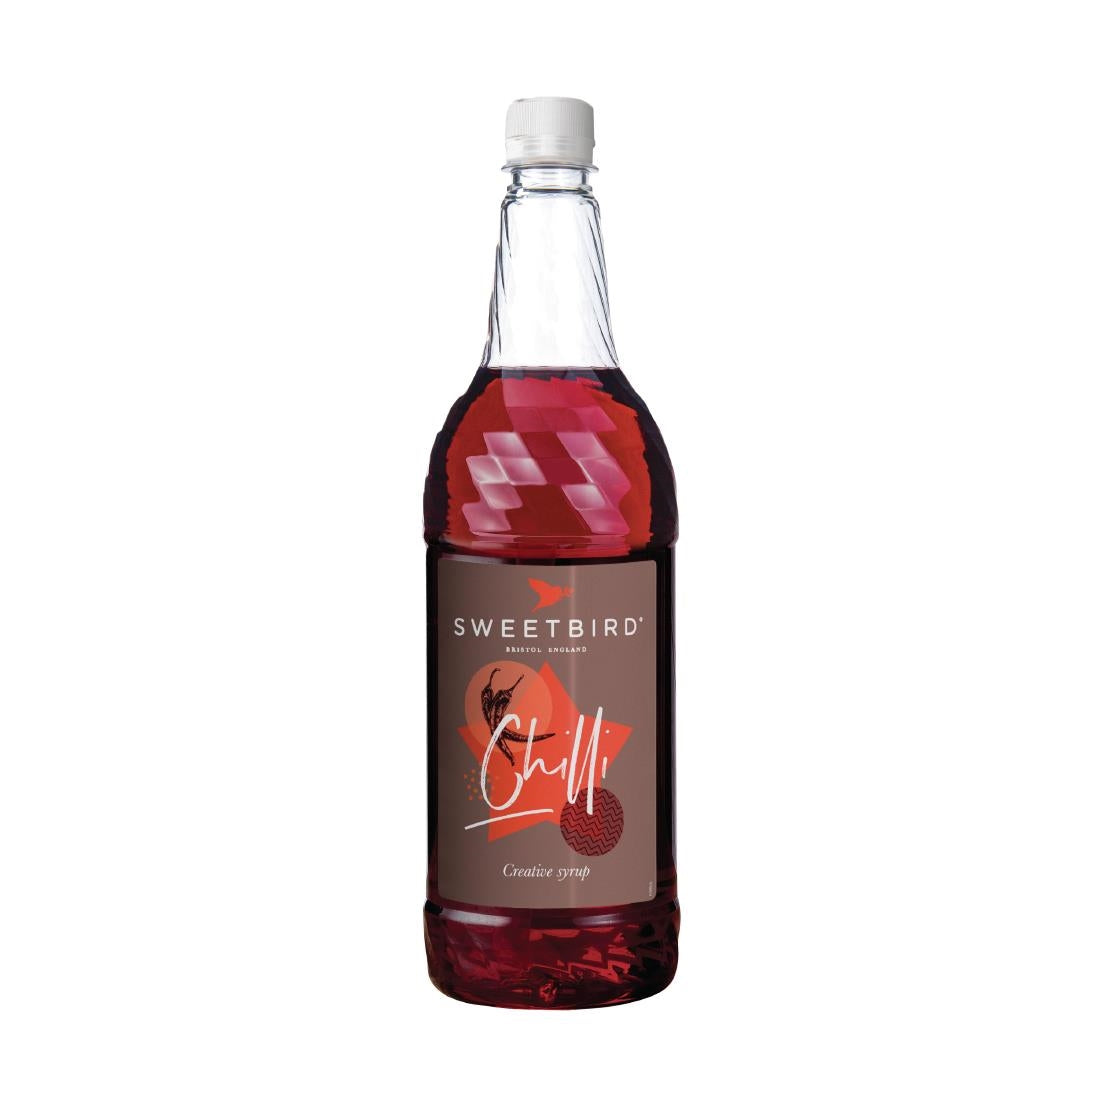 GP392 Sweetbird Chilli Syrup 1Ltr Bottle